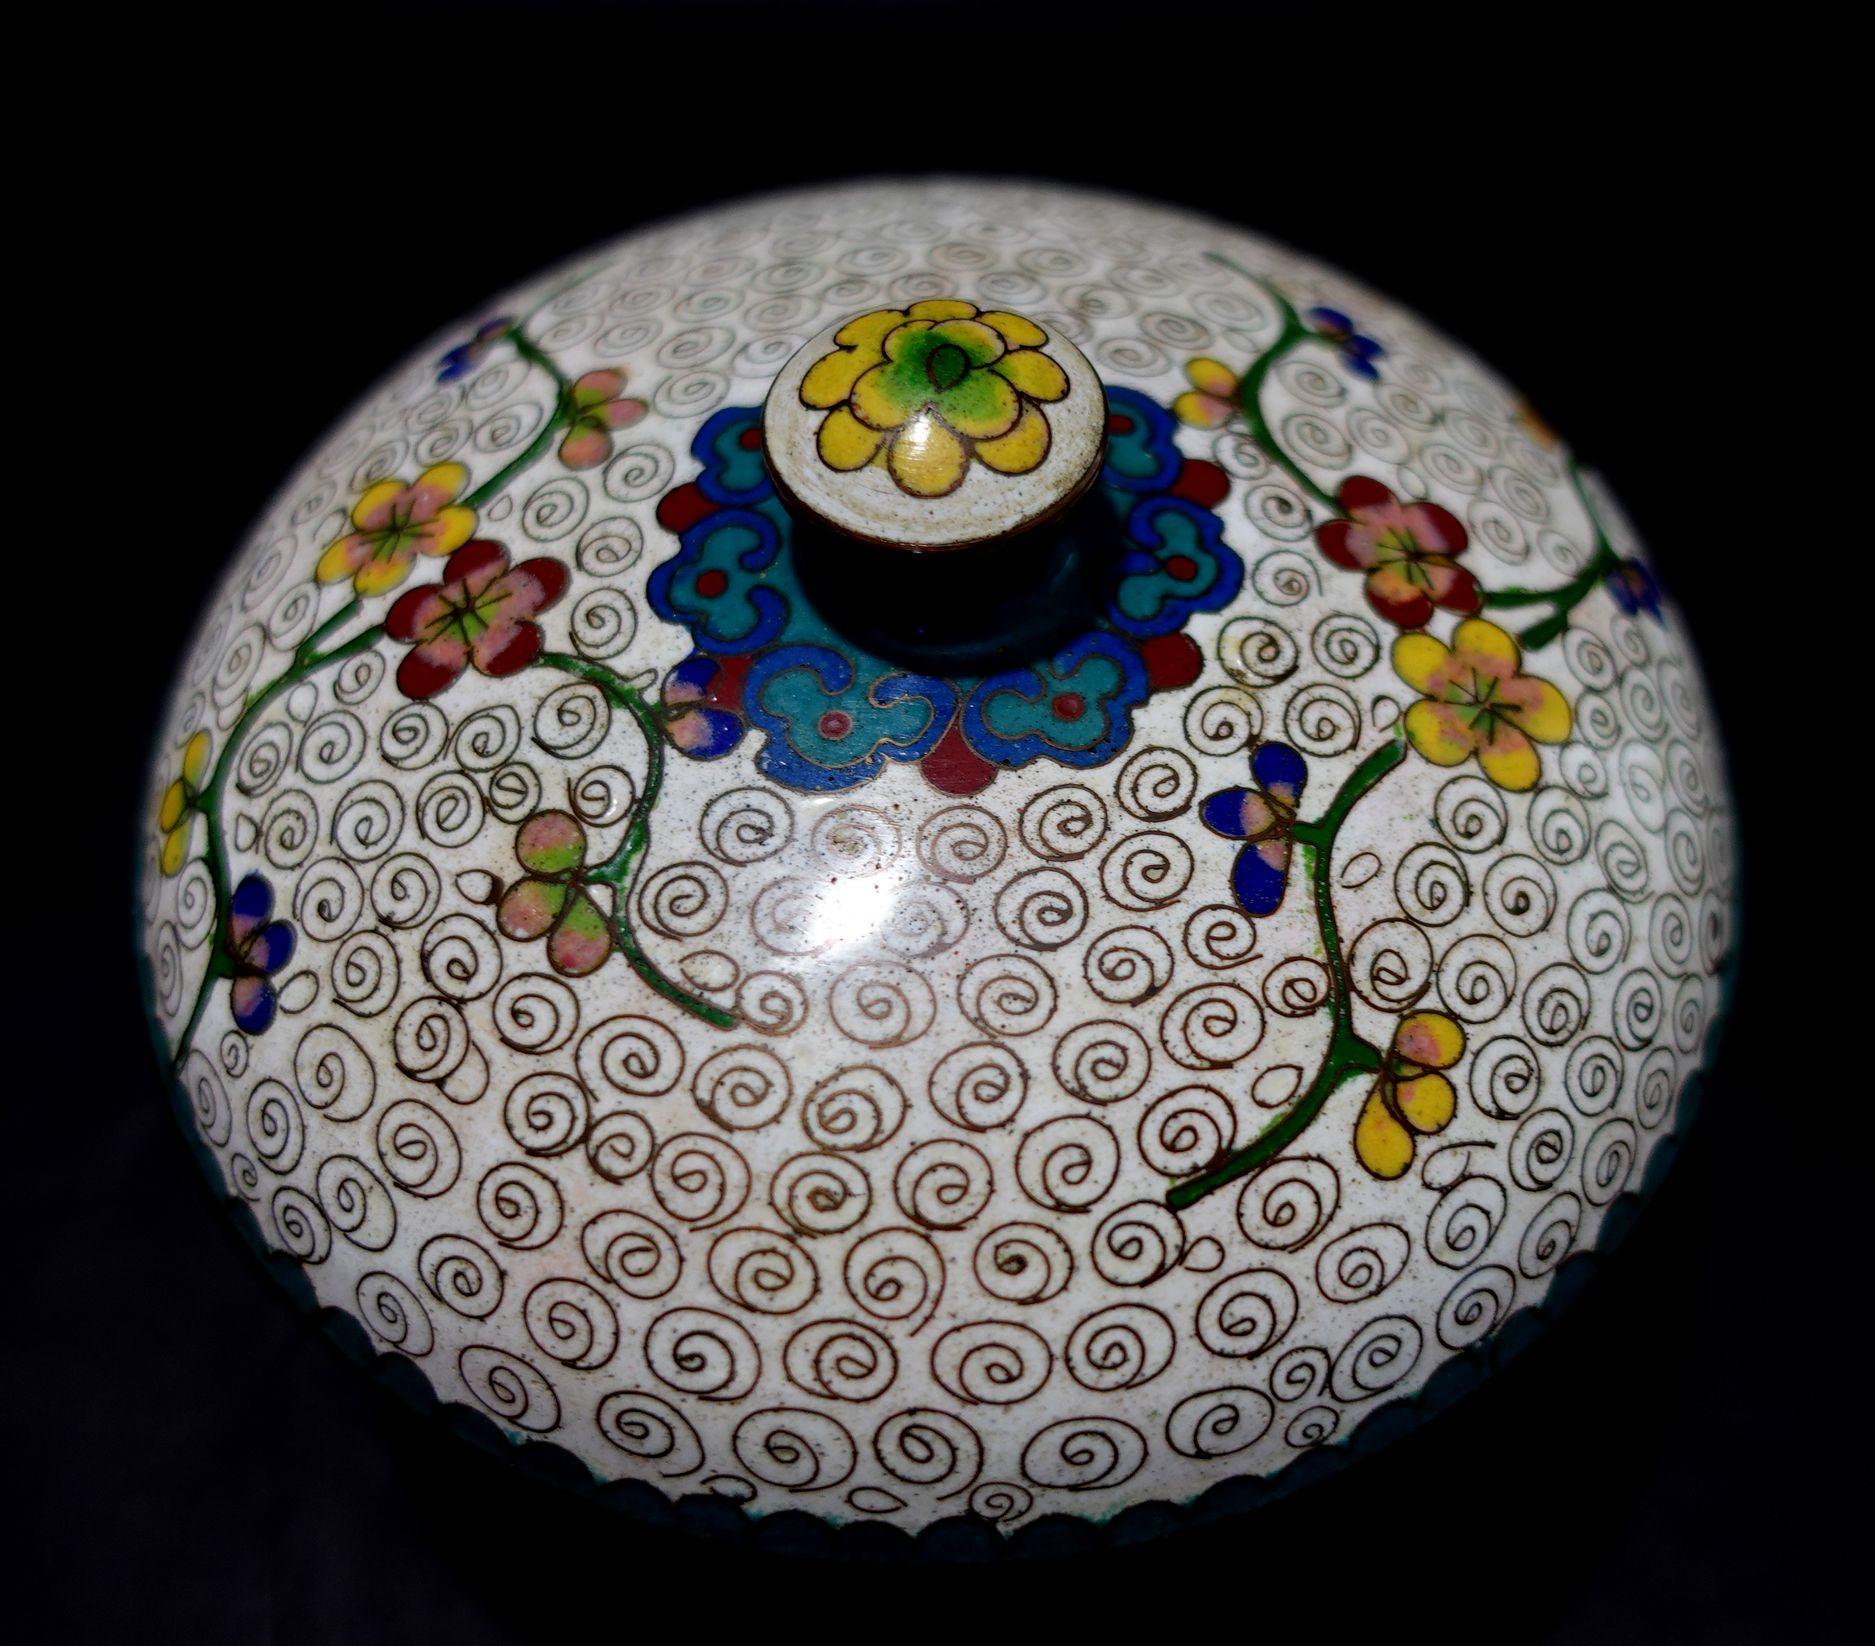 Antique Chinese Cloisonné Enamel Round Lidded Box 19th Century CO#09 In Good Condition For Sale In Norton, MA